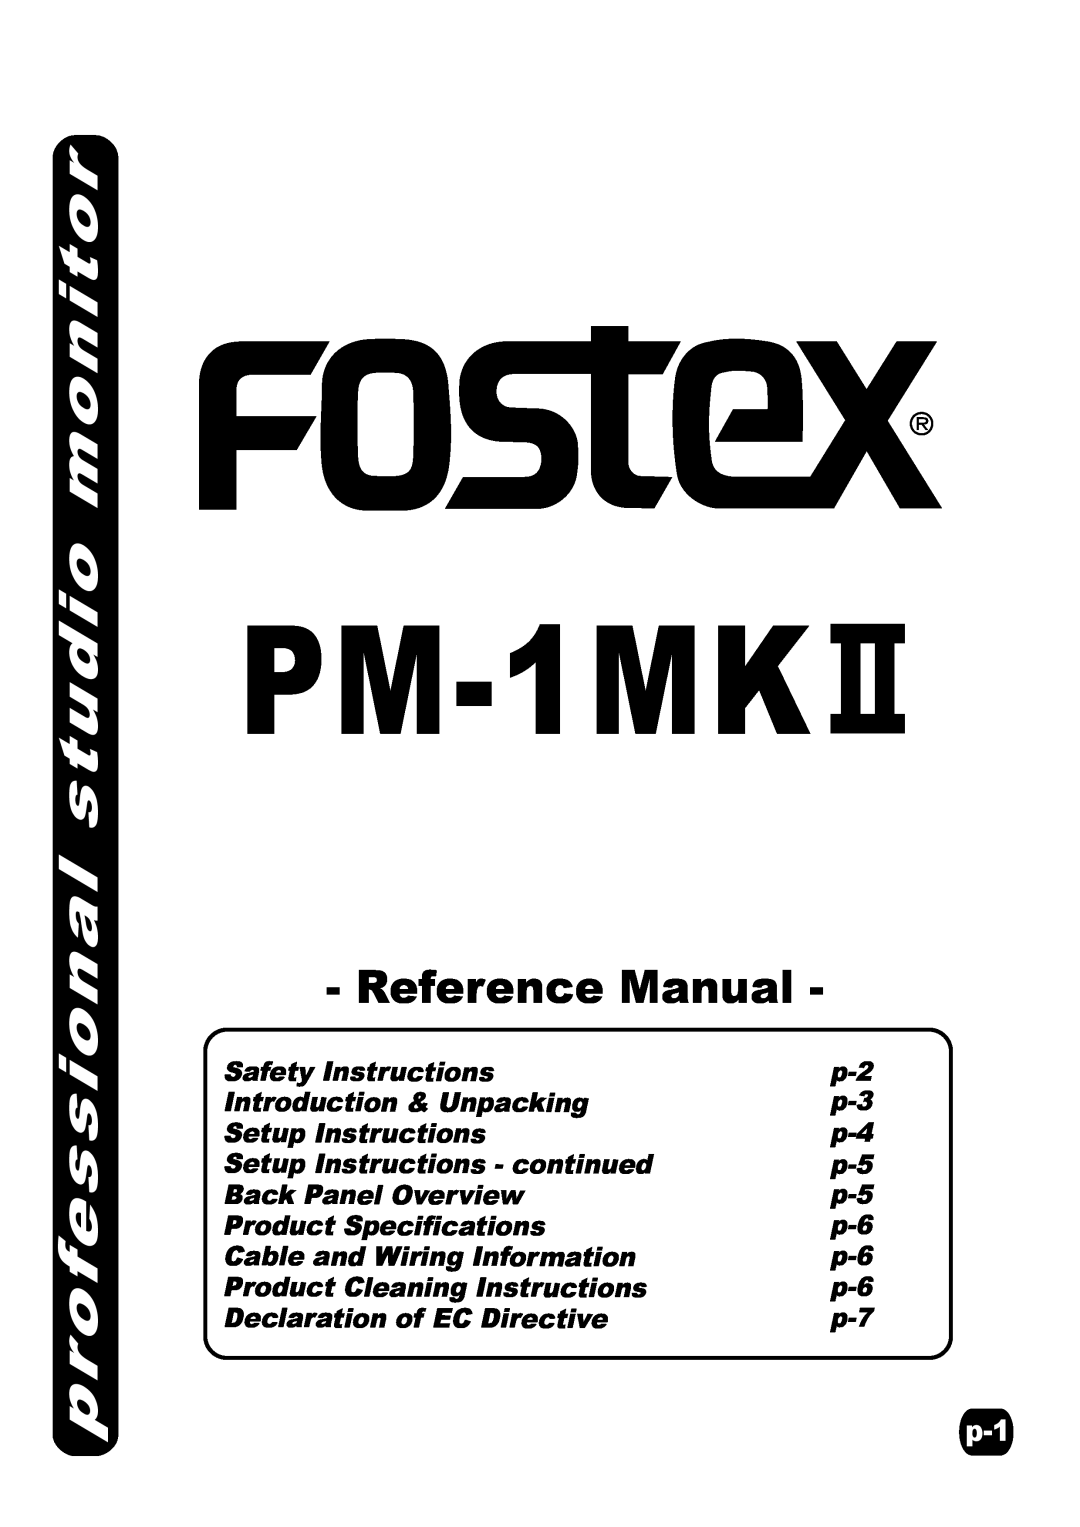 Fostex PM-1MKII specifications professional studio monitor, Reference Manual, Safety Instructions, Setup Instructions 